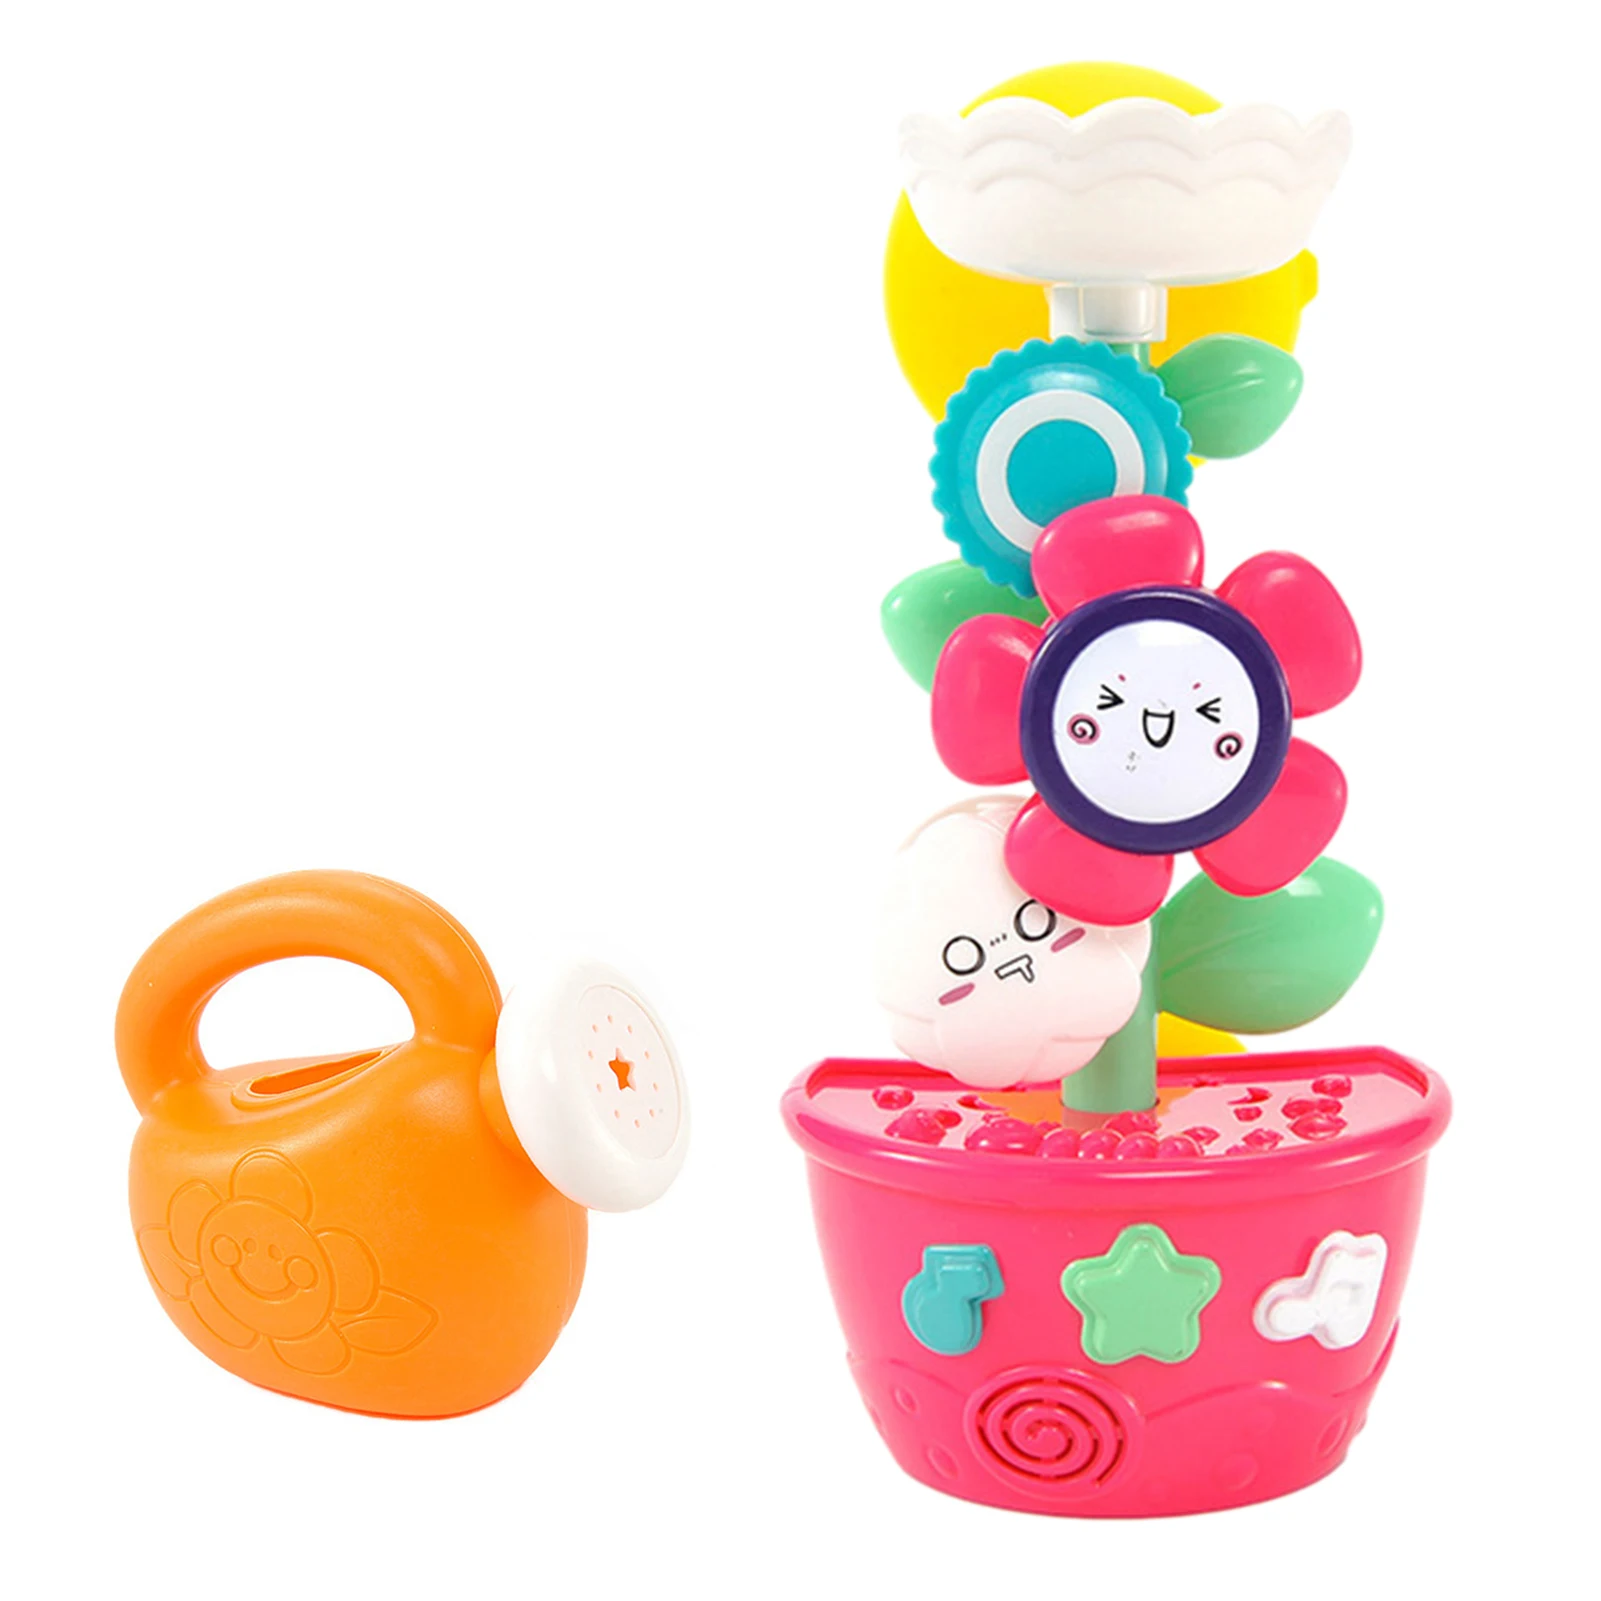 

New Sunflower Toddler Bath Toys 1-4 Years Old Babies Water Toys Cute Funny Infant Bathroom Shower Toys Kids Light Bathtub Toys